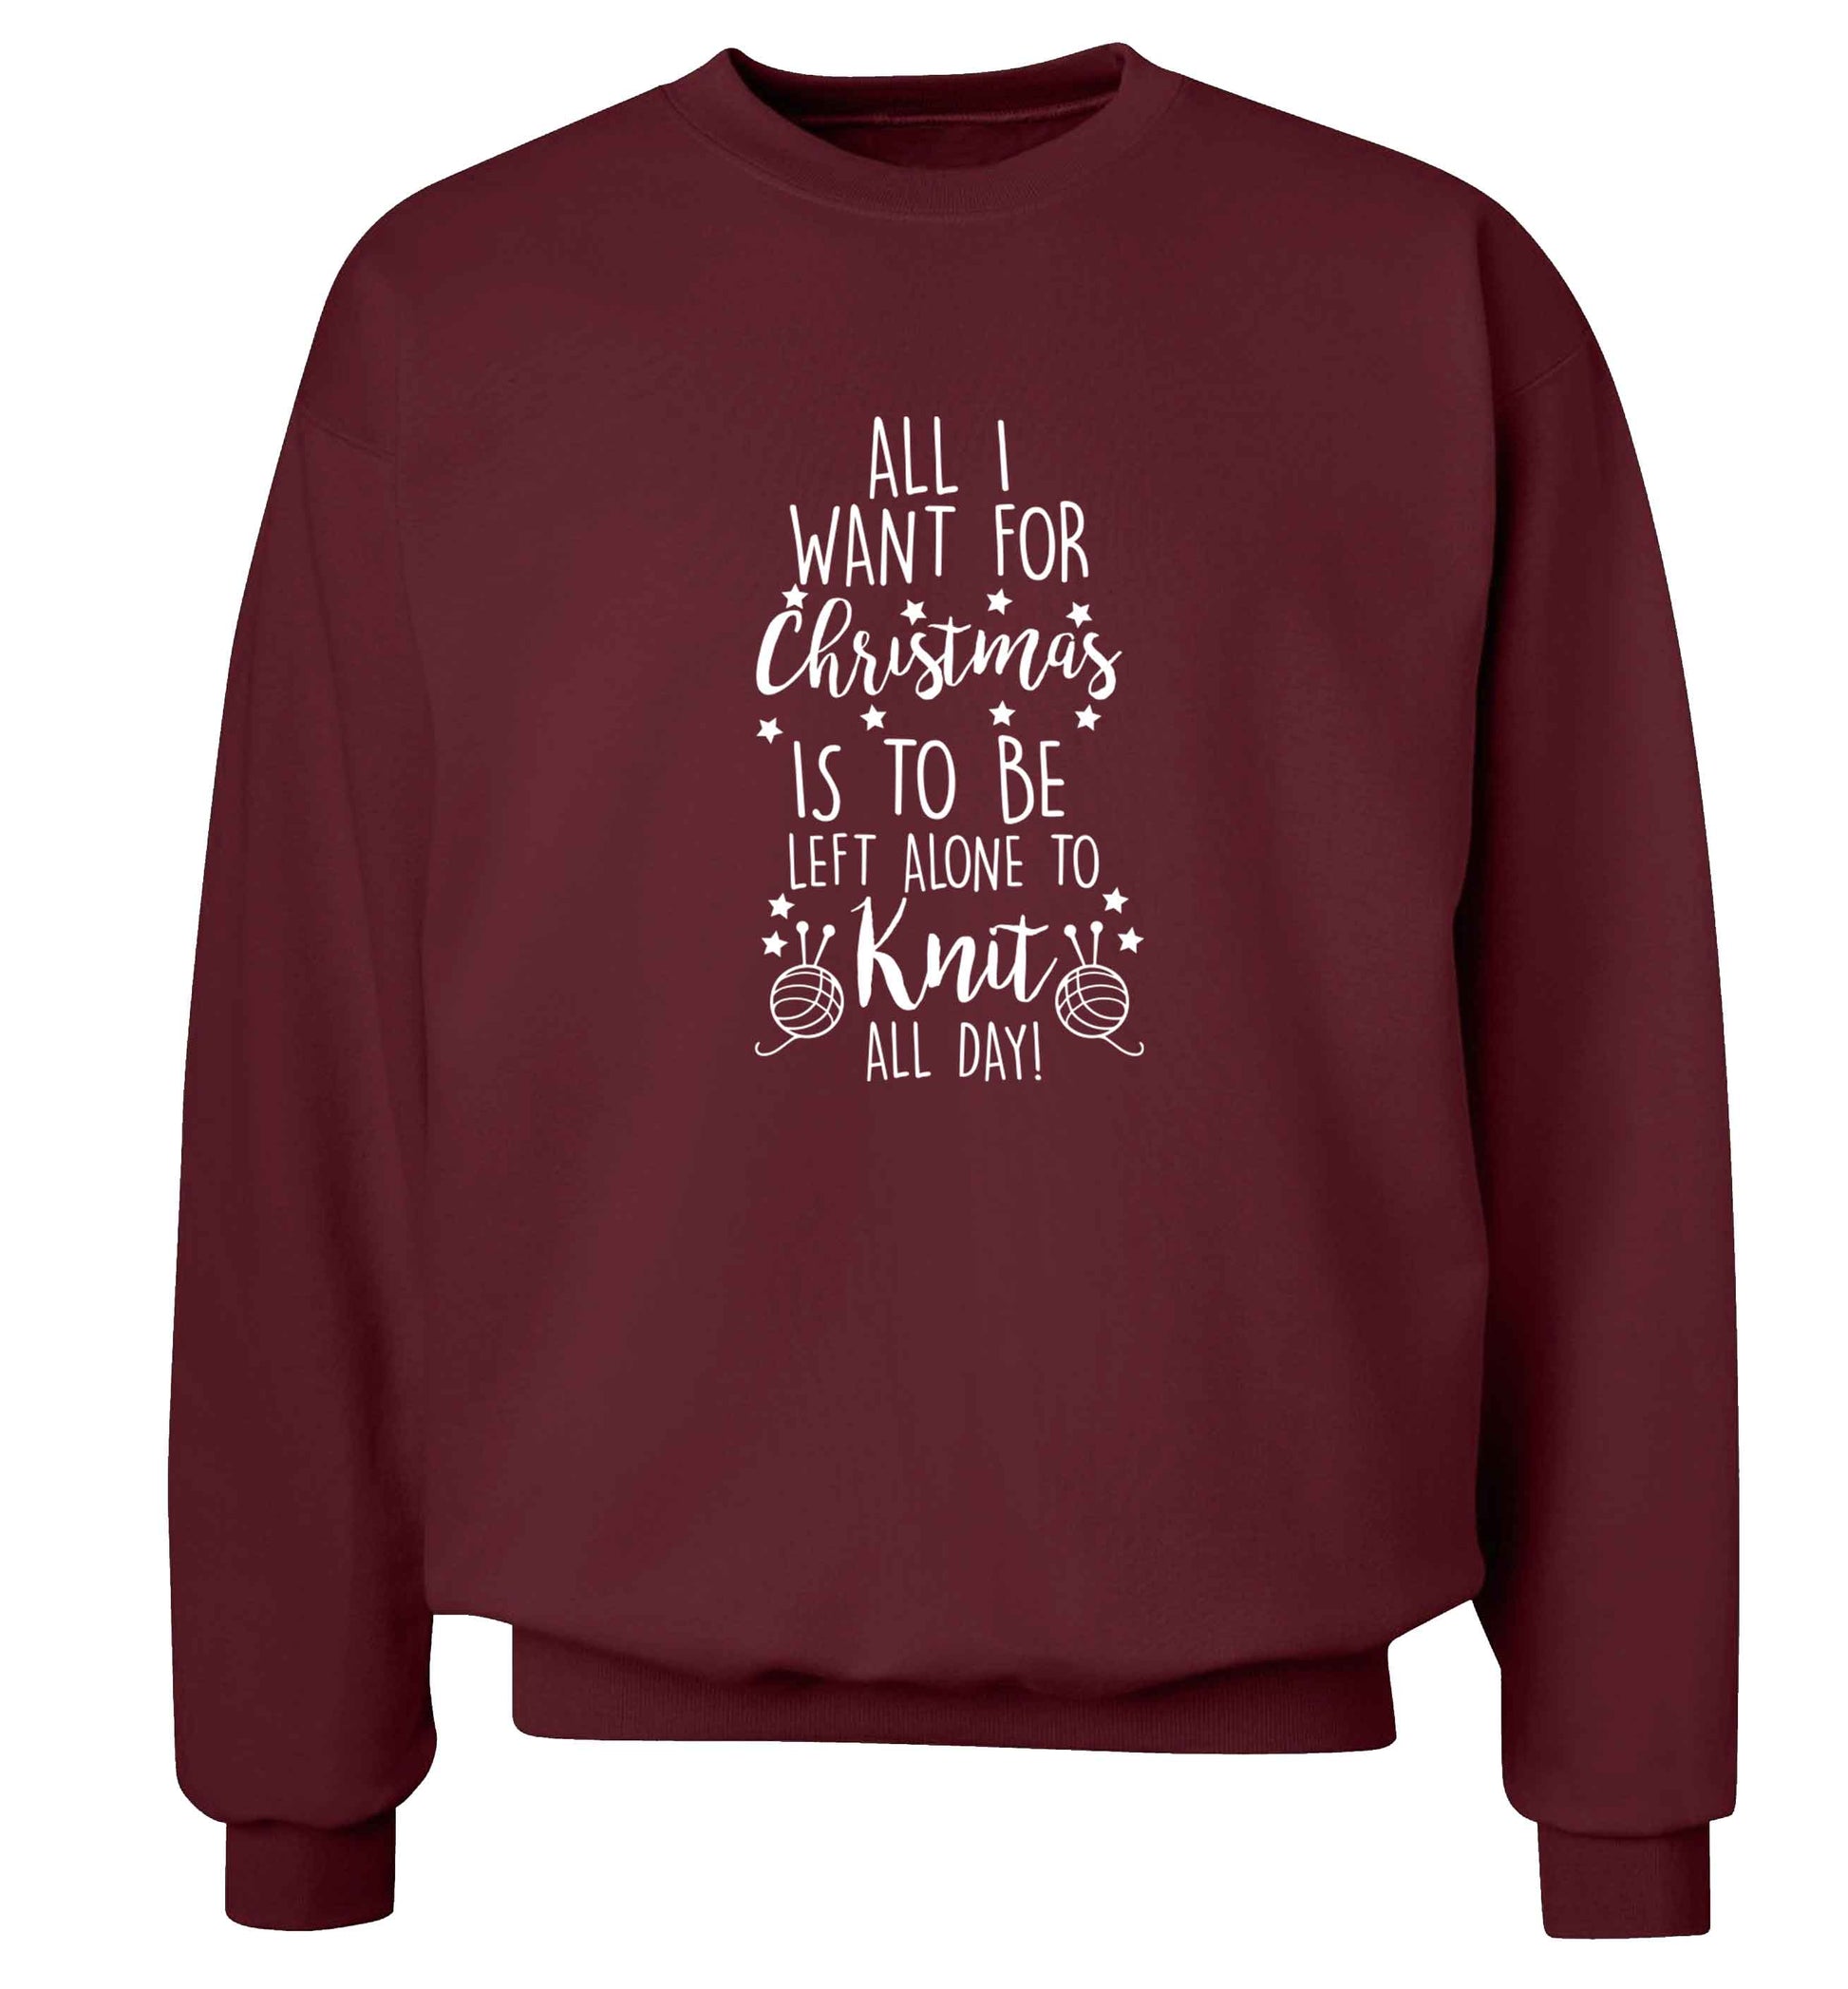 Merry Christmas adult's unisex maroon sweater 2XL